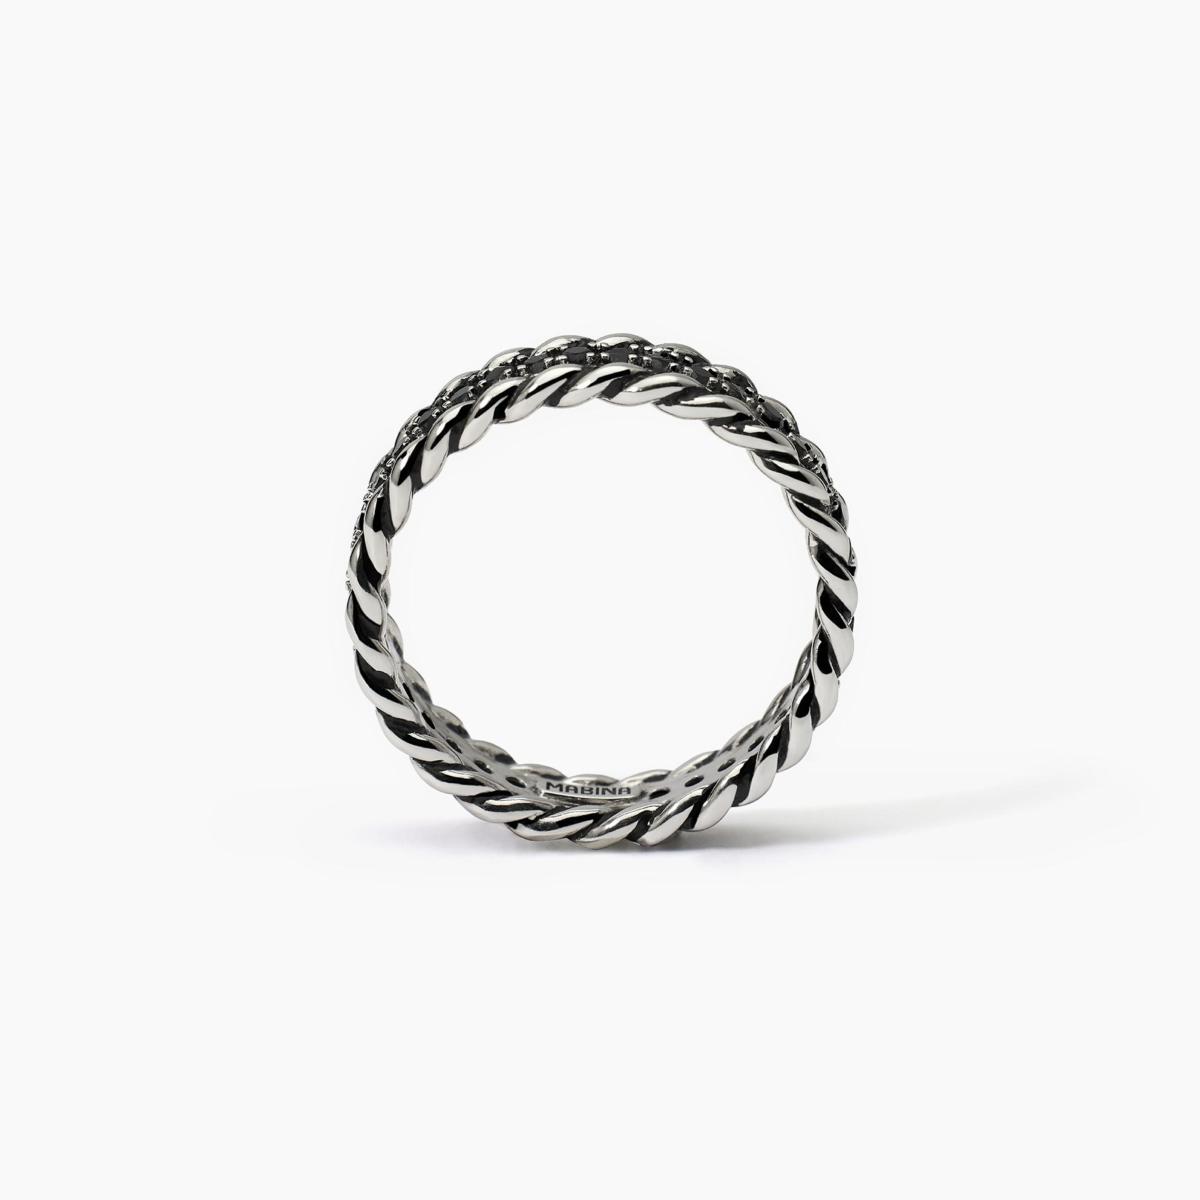 MABINA 925mm SILVER RING FOR MEN 523332 SIZE 25